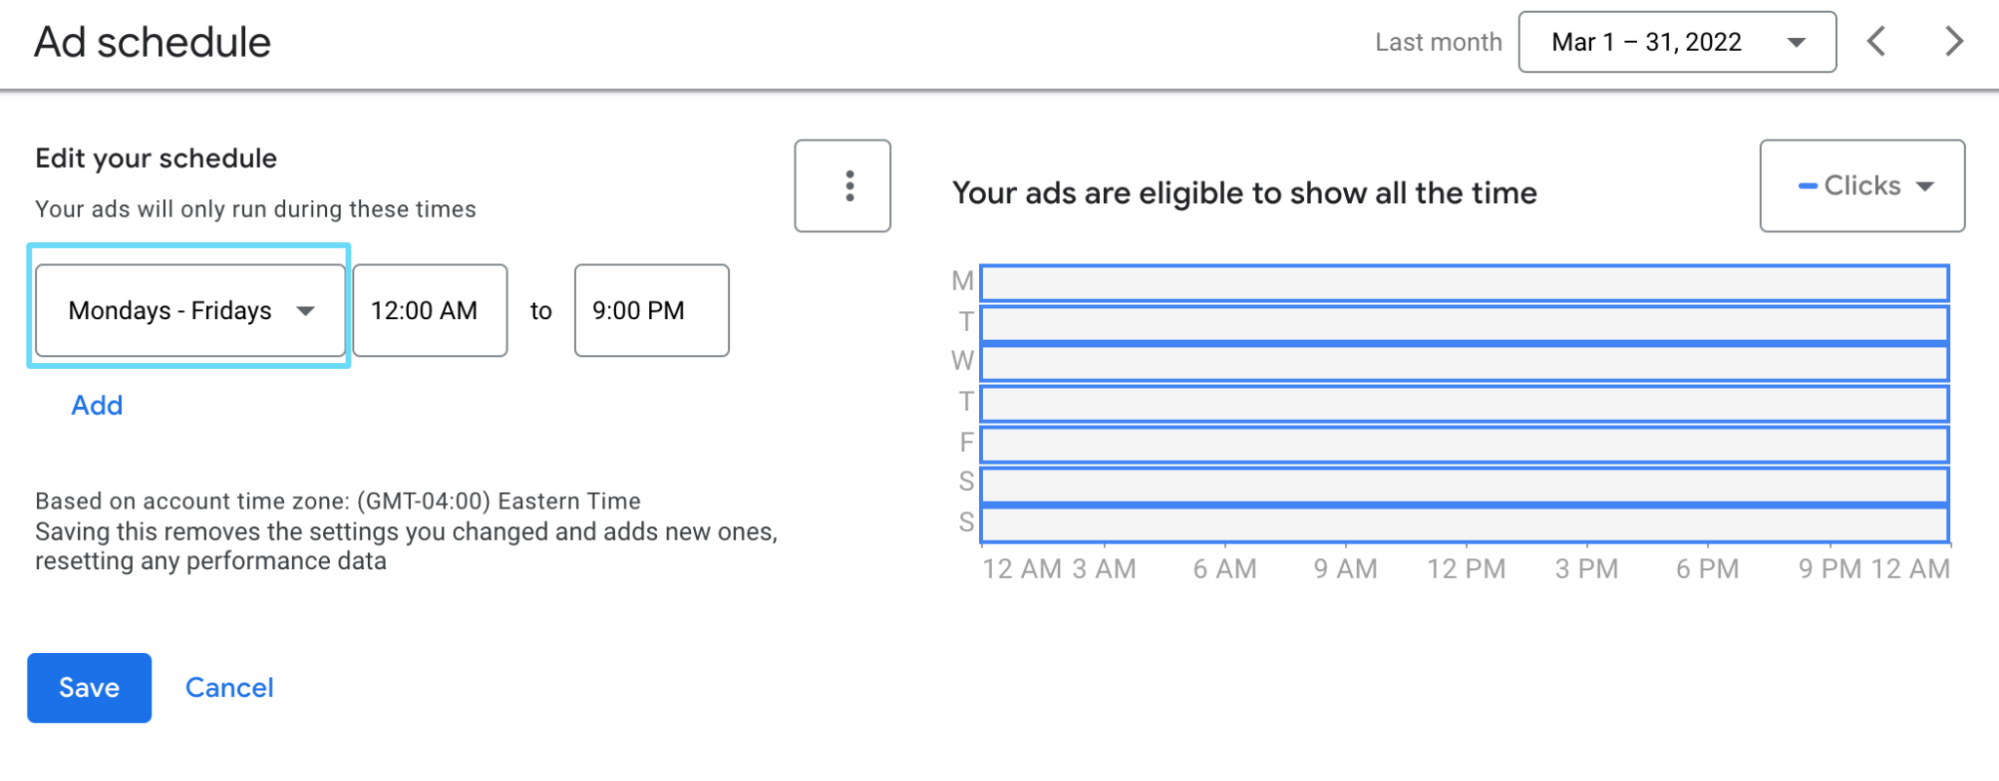 edit schedule for ads in Google Ads